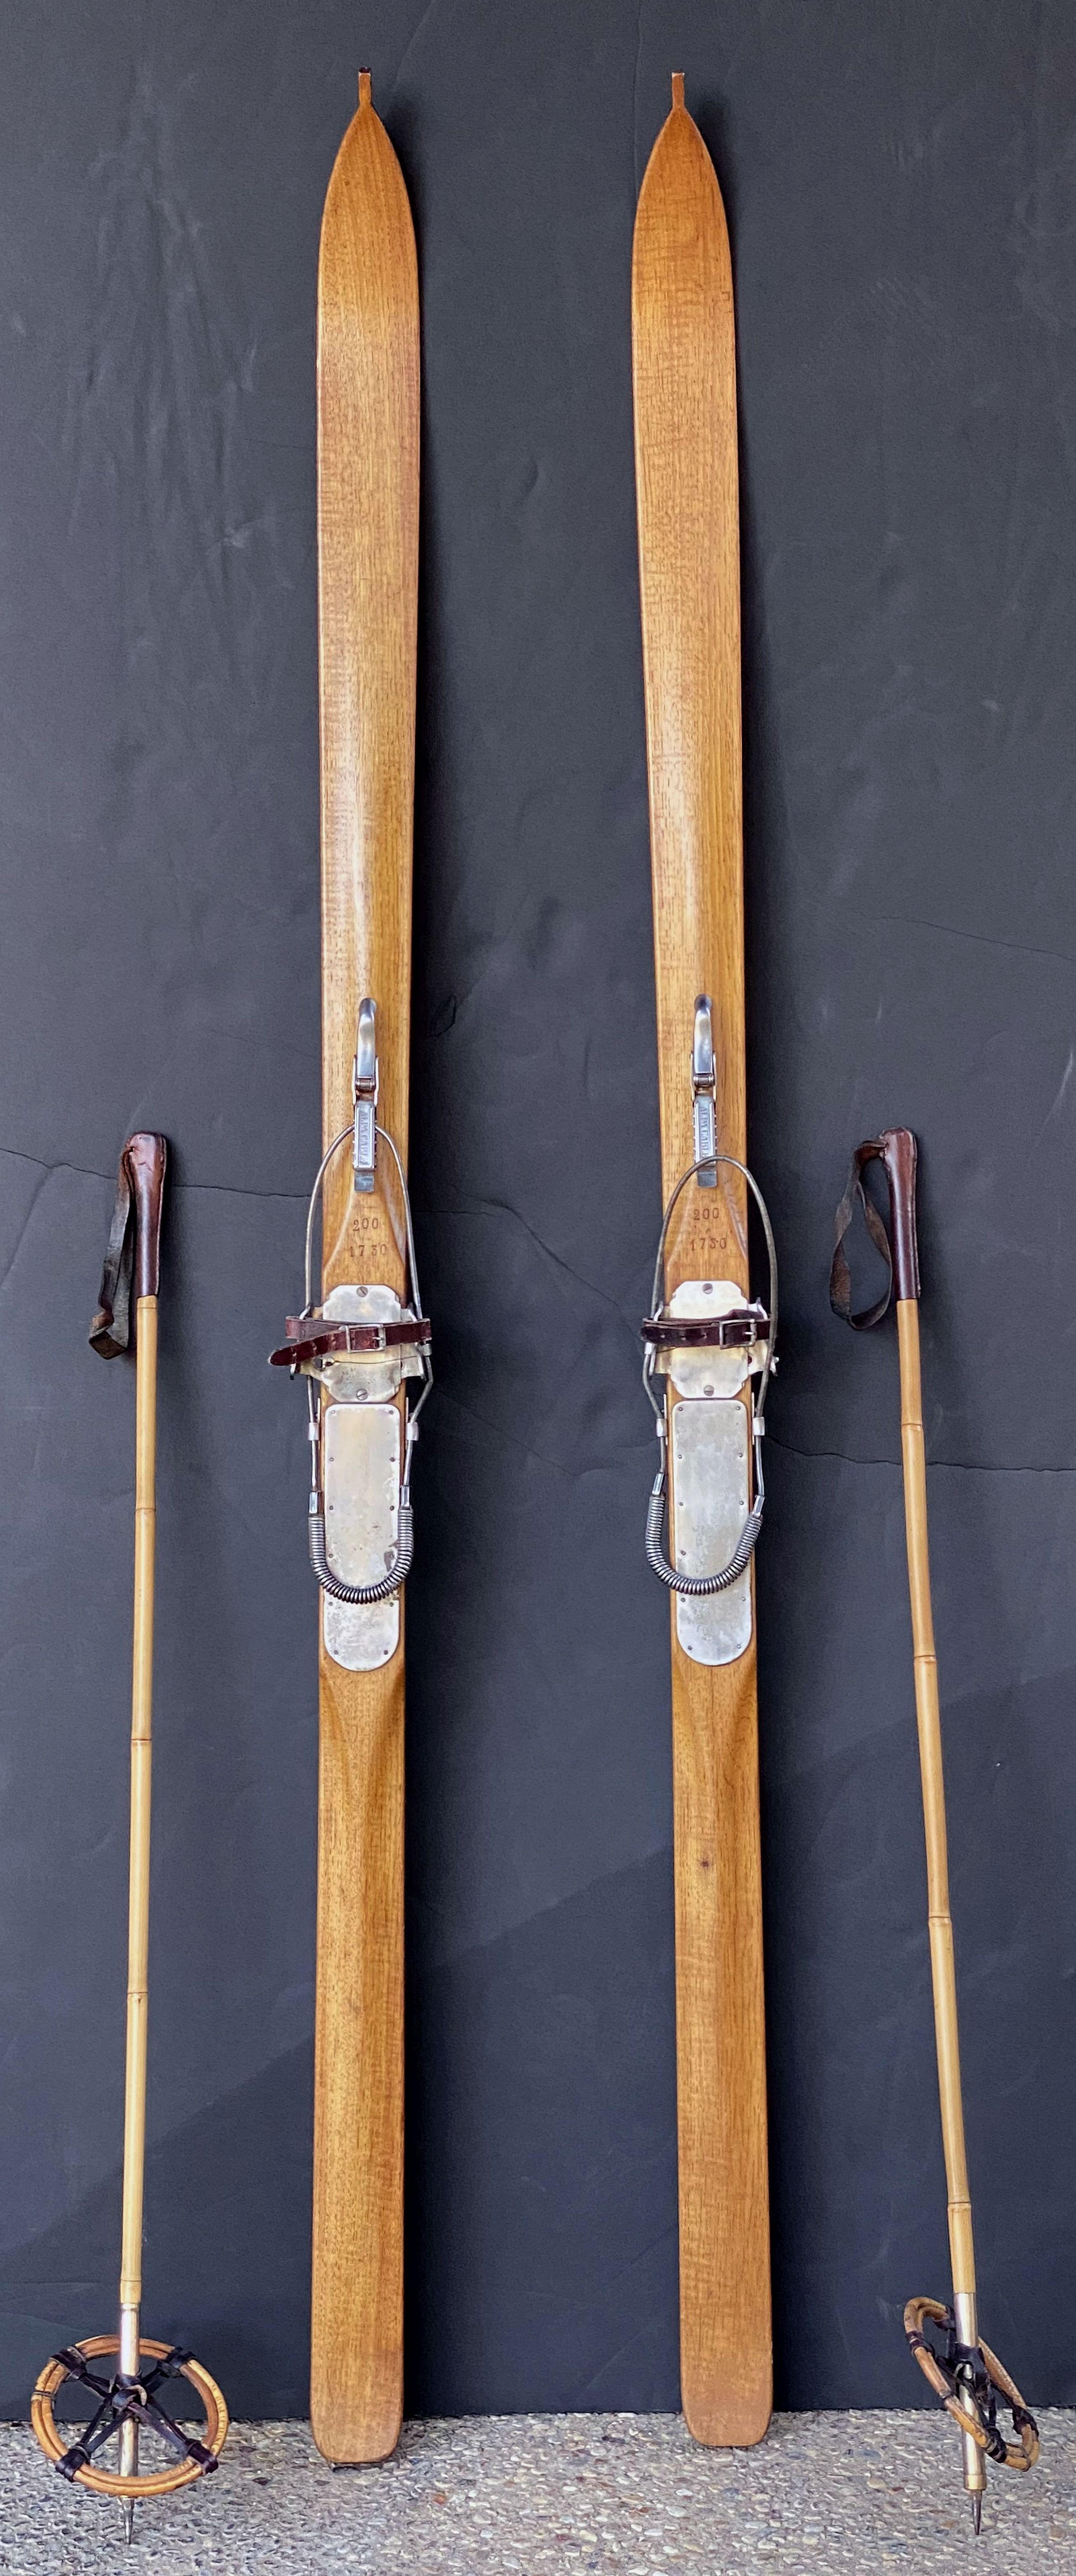 old wooden skis